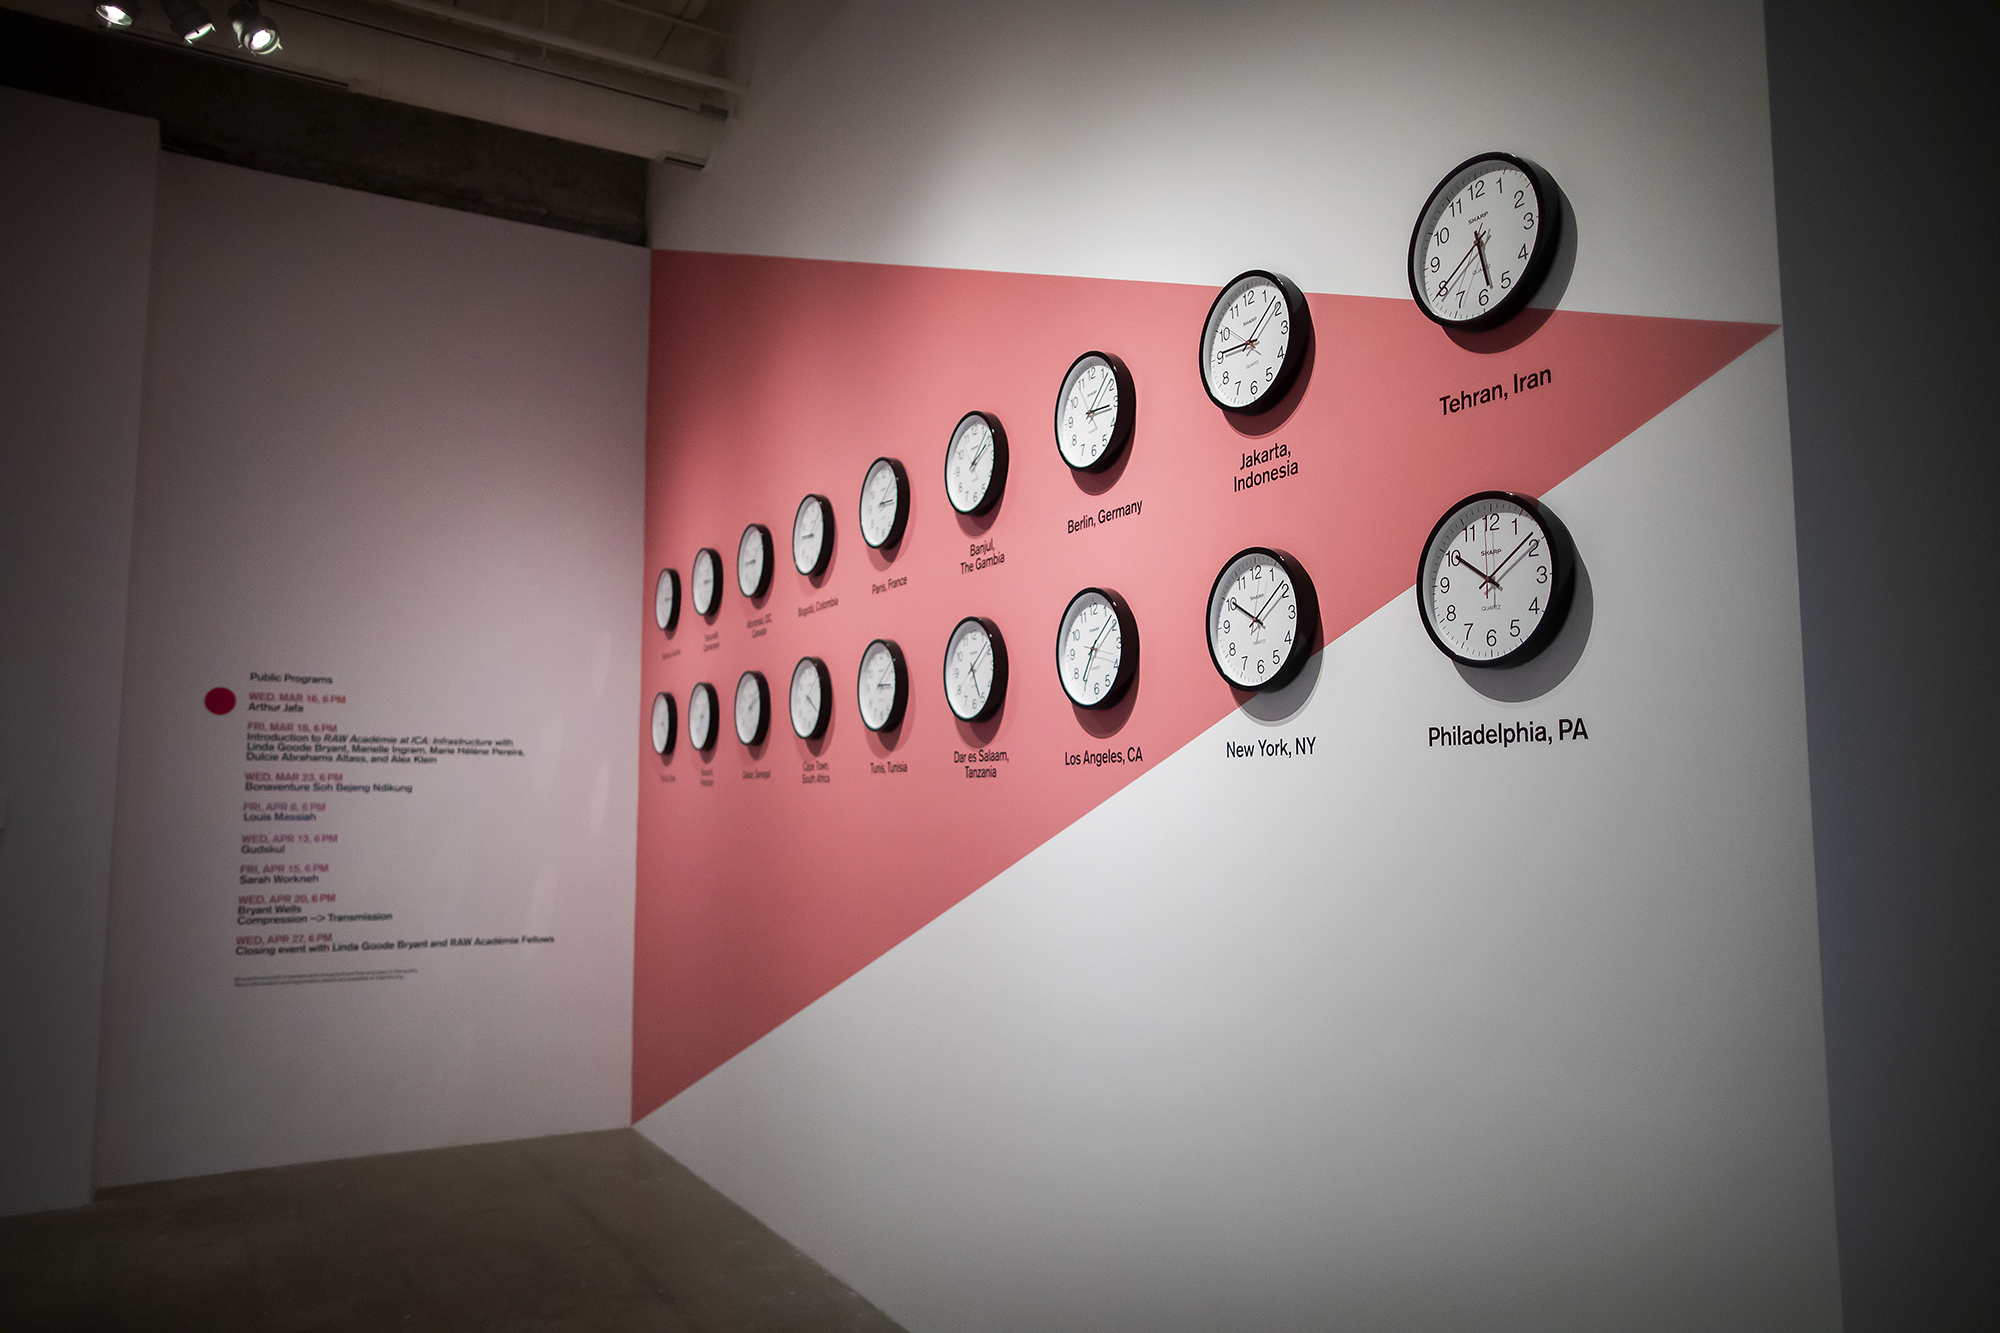 Clocks of the world on a wall with a red triangle